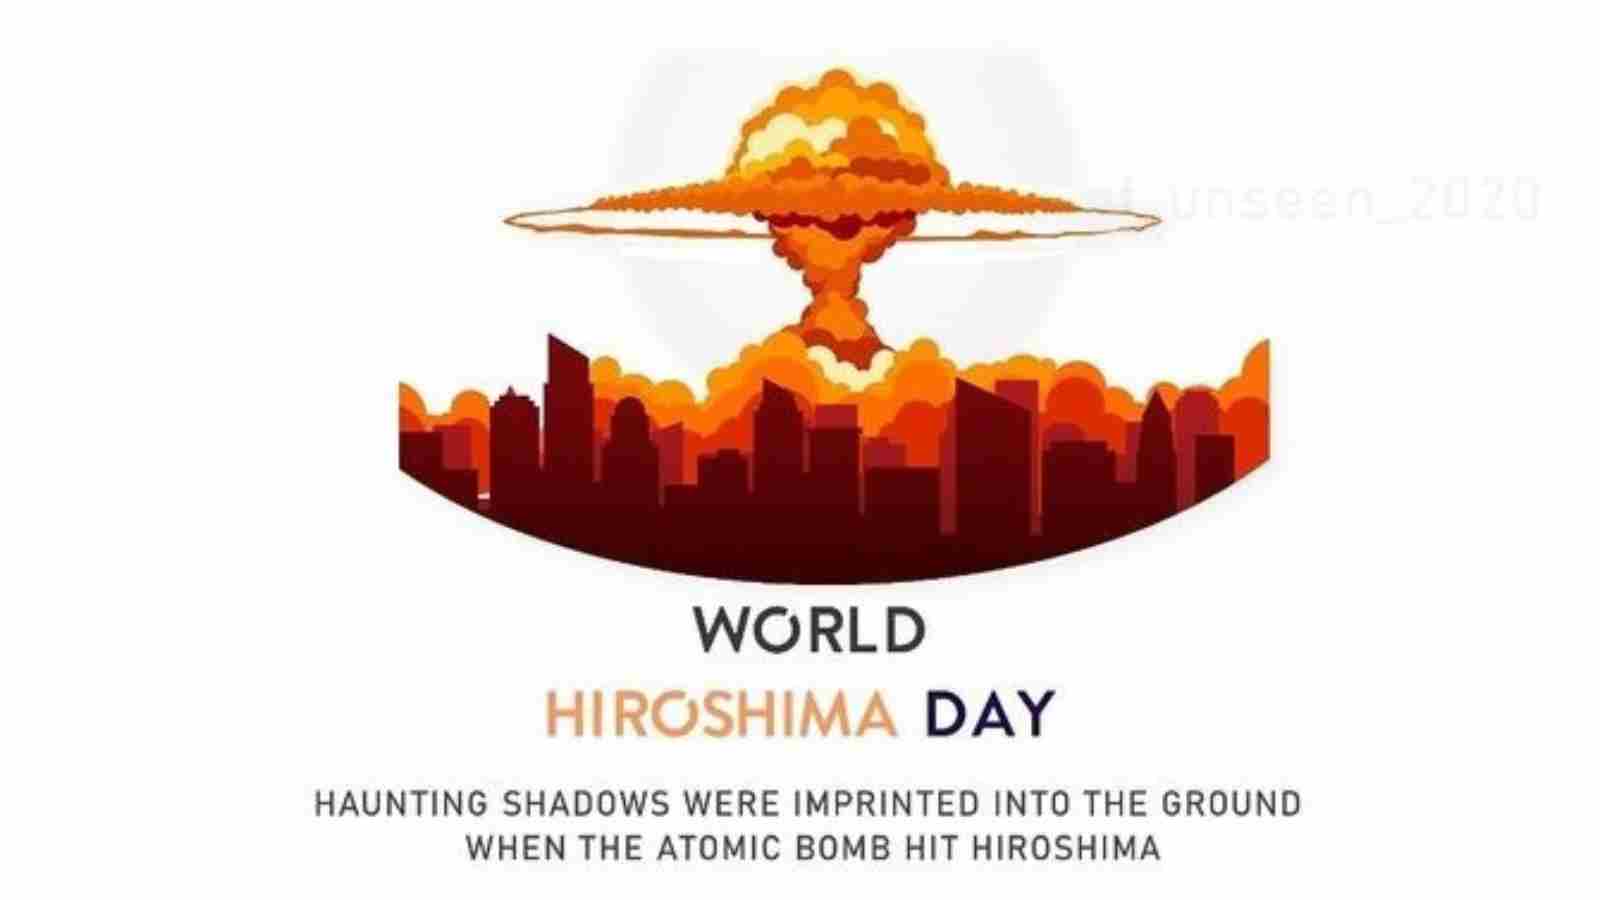 Hiroshima Day 2023: Wishes, Quotes, Slogans and More!